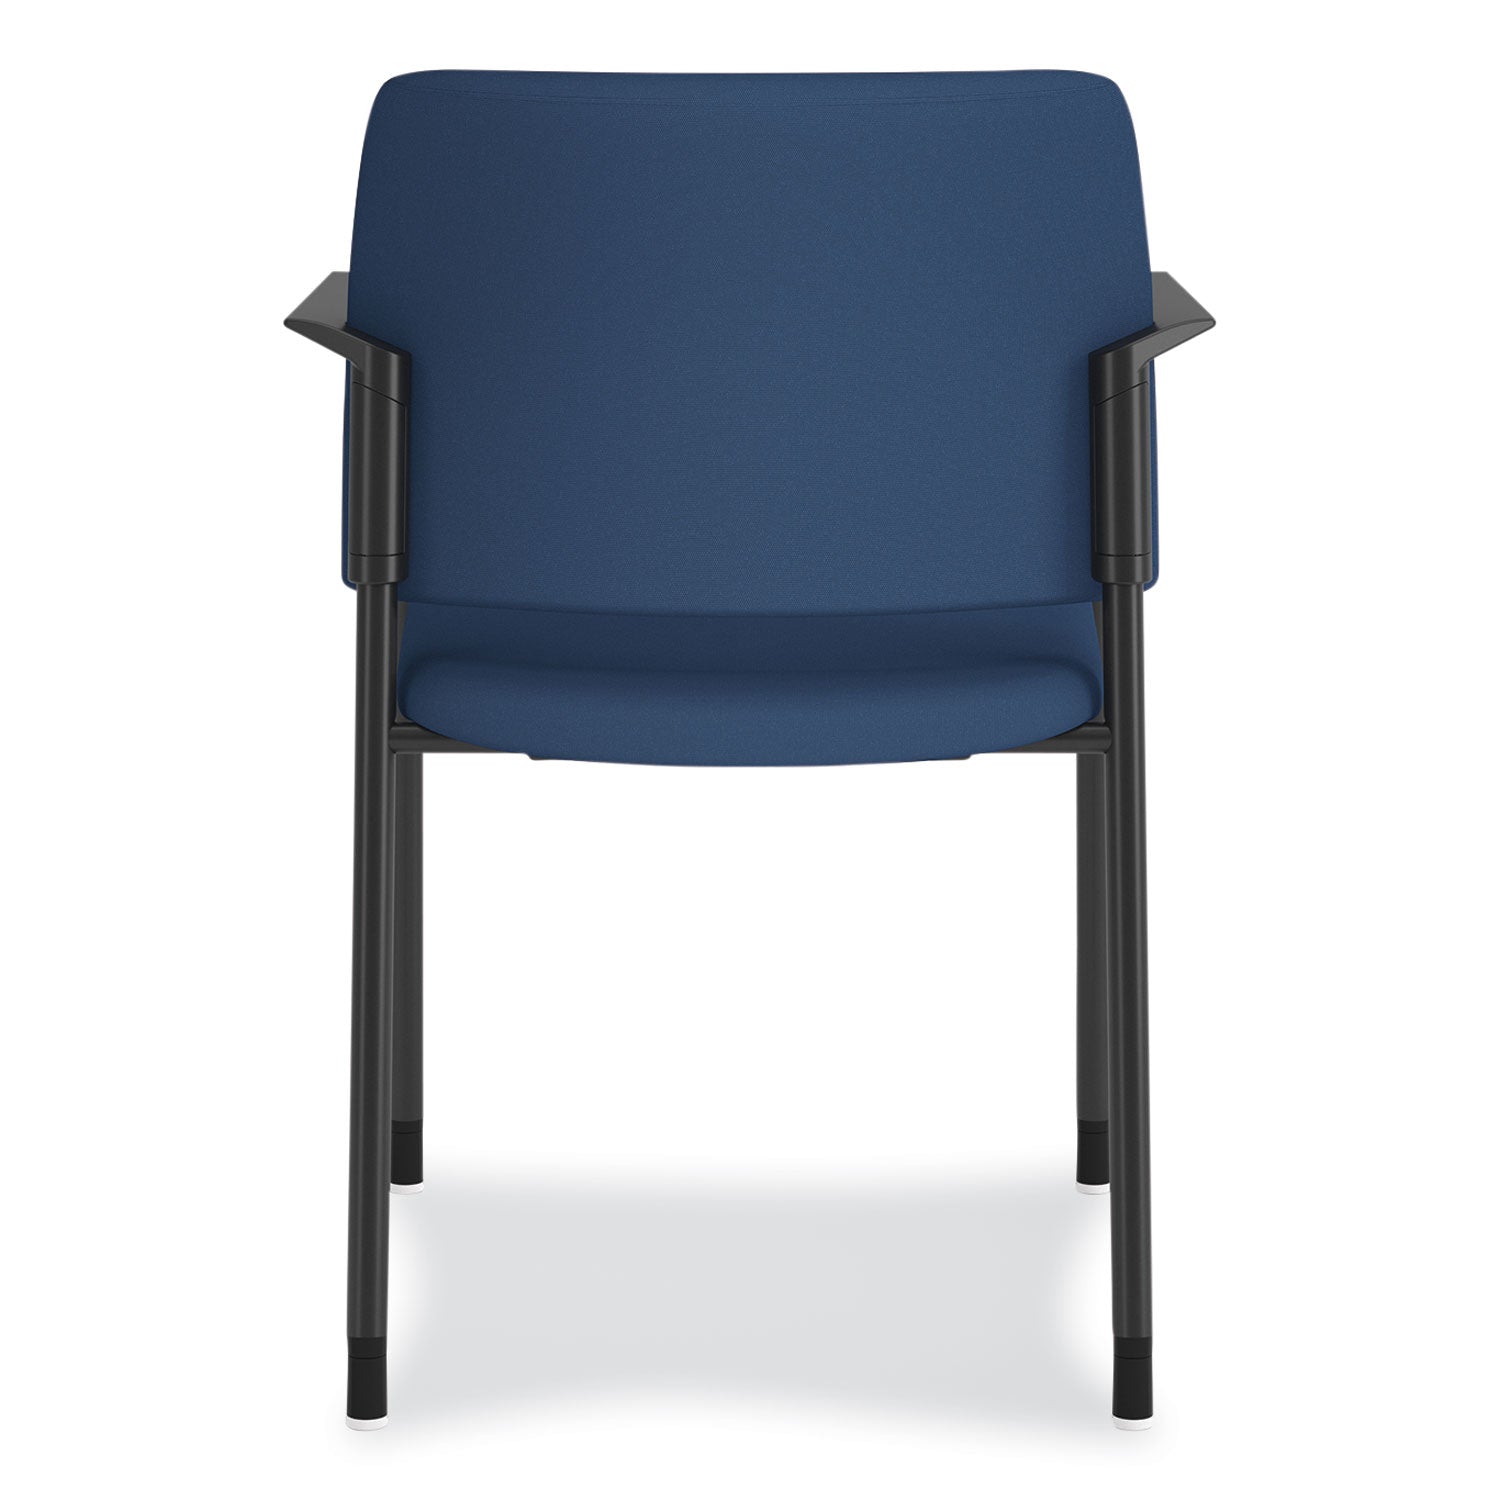 accommodate-series-guest-chair-with-arms-vinyl-upholstery-235-x-2225-x-32-elysian-seat-back-charblack-legs-2-carton_honsgs6fbsx04cb - 4